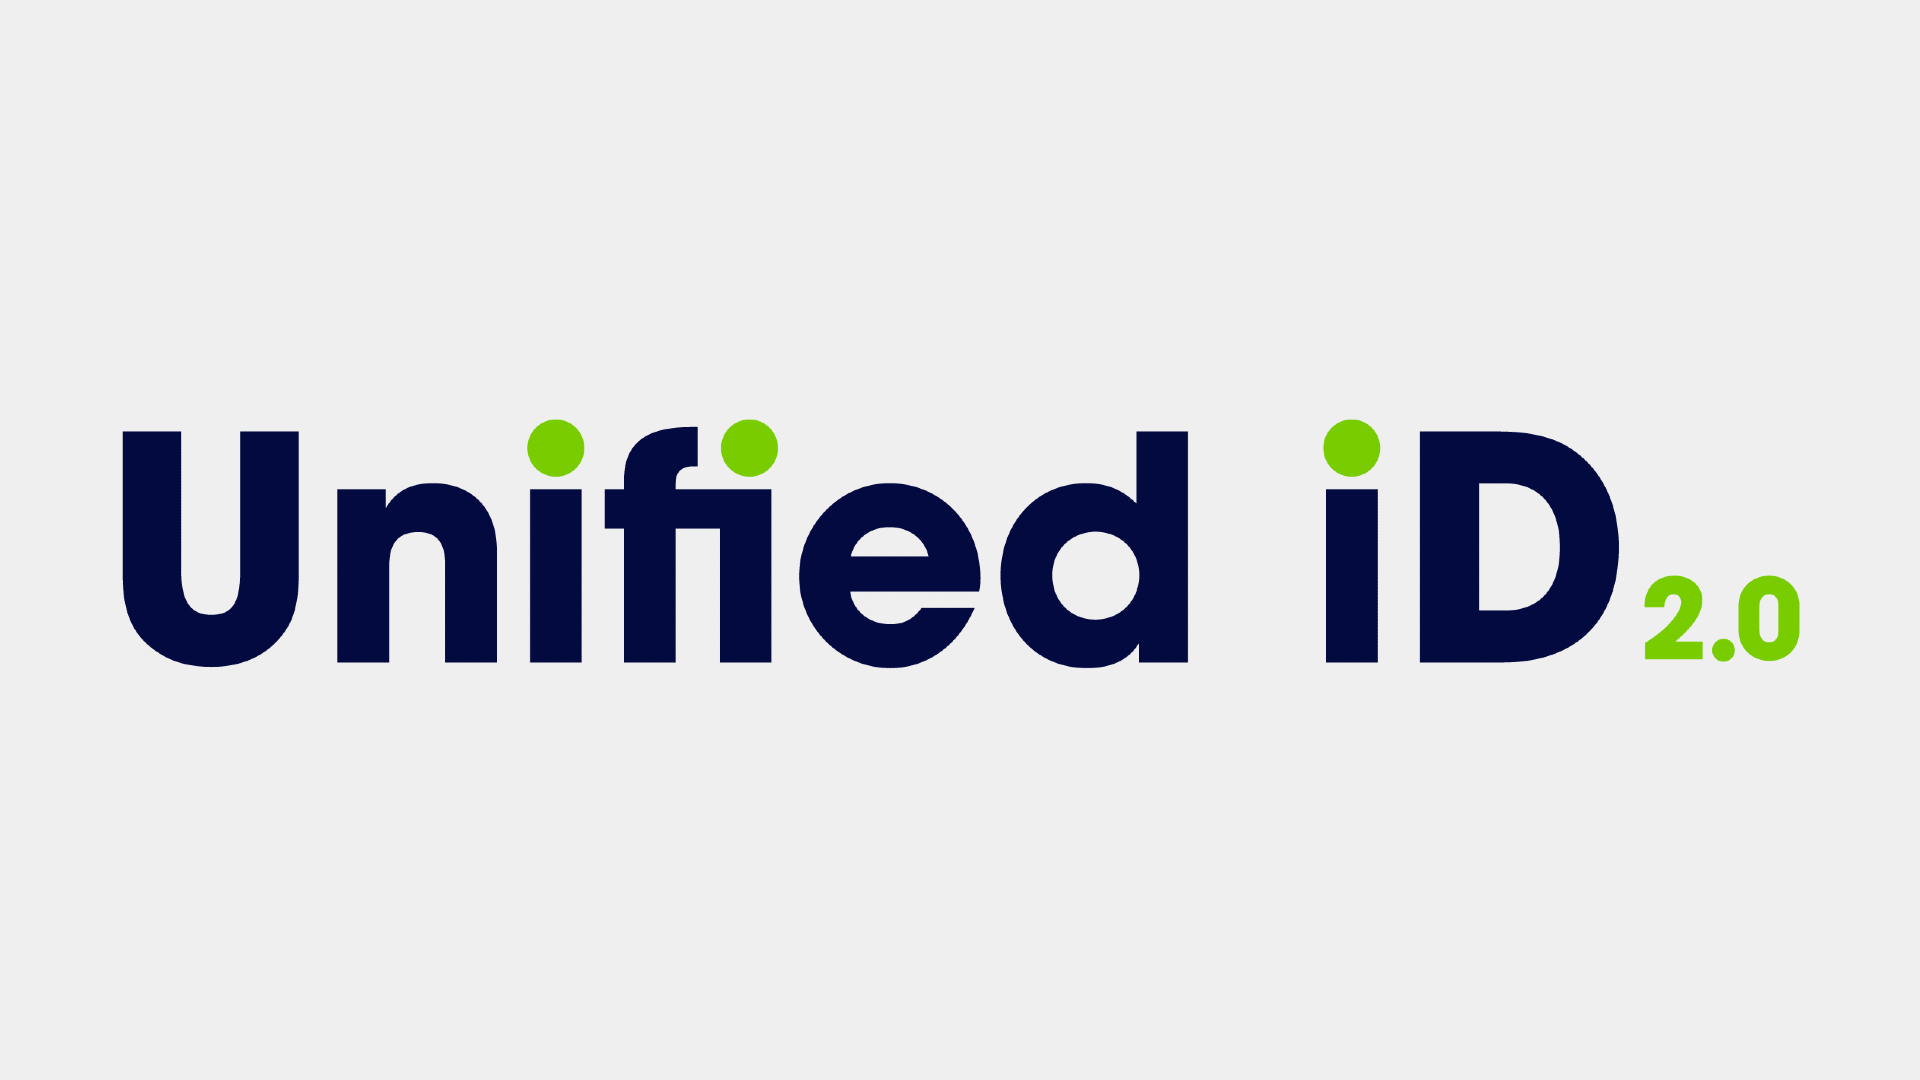 Oracle to participate in Unified ID 2.0